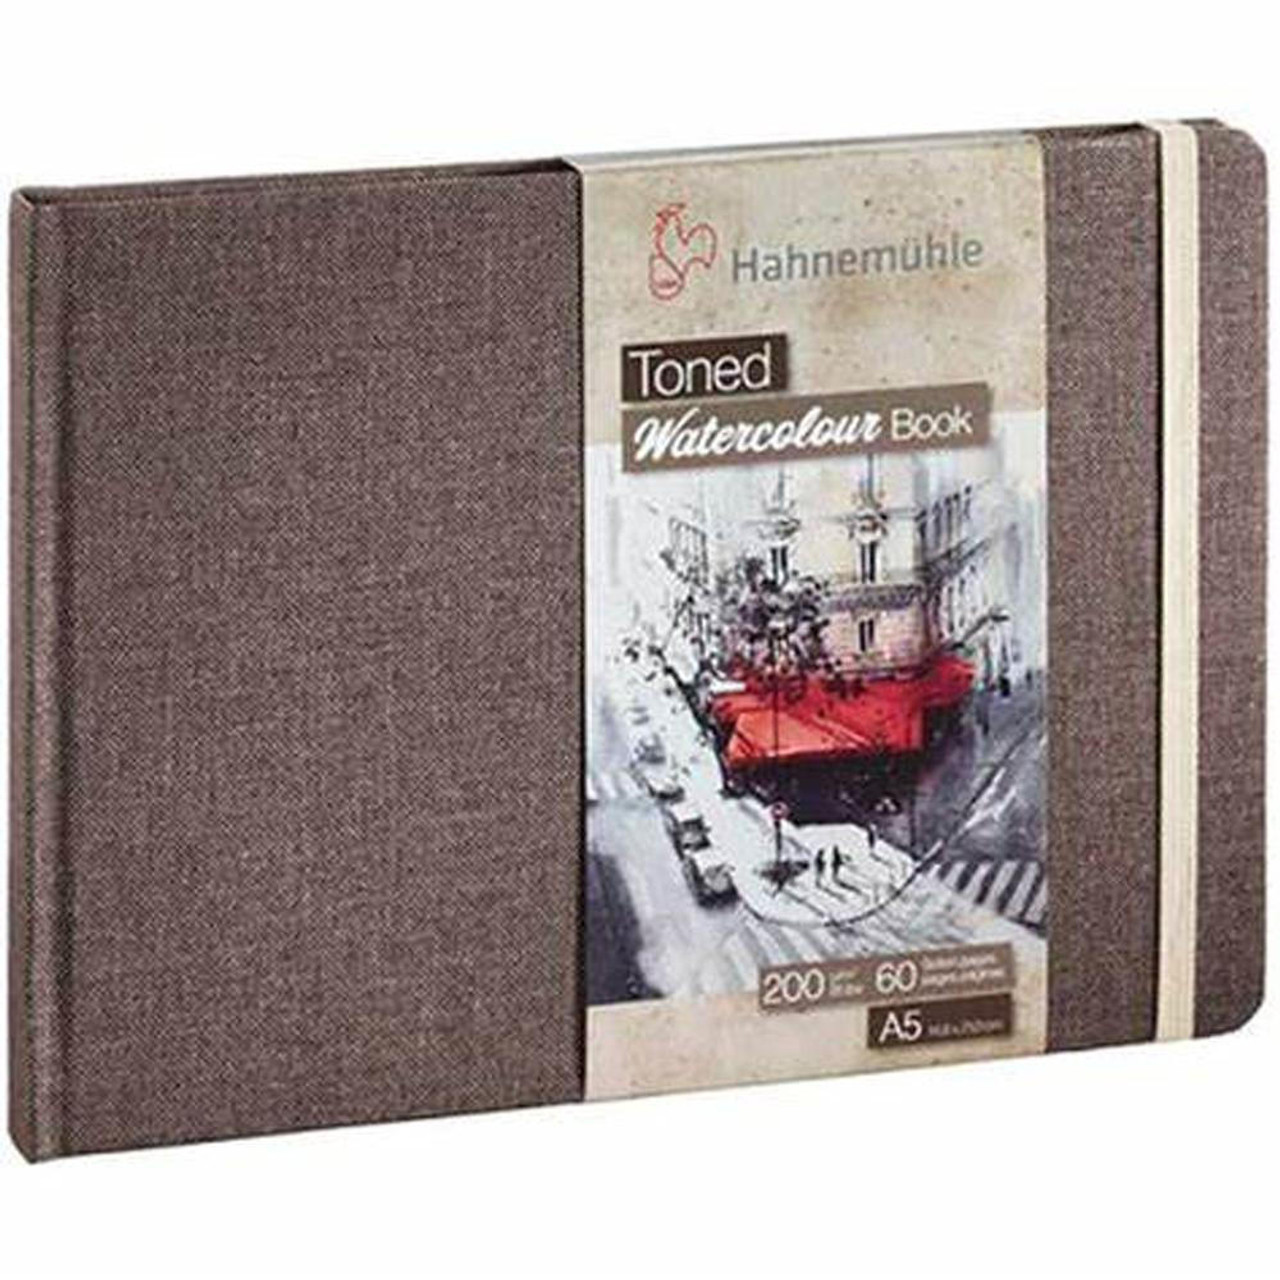 Hahnemuhle Toned Grey Watercolor Paper Book, 30 Sheets, Square, 5.5 x 5.5